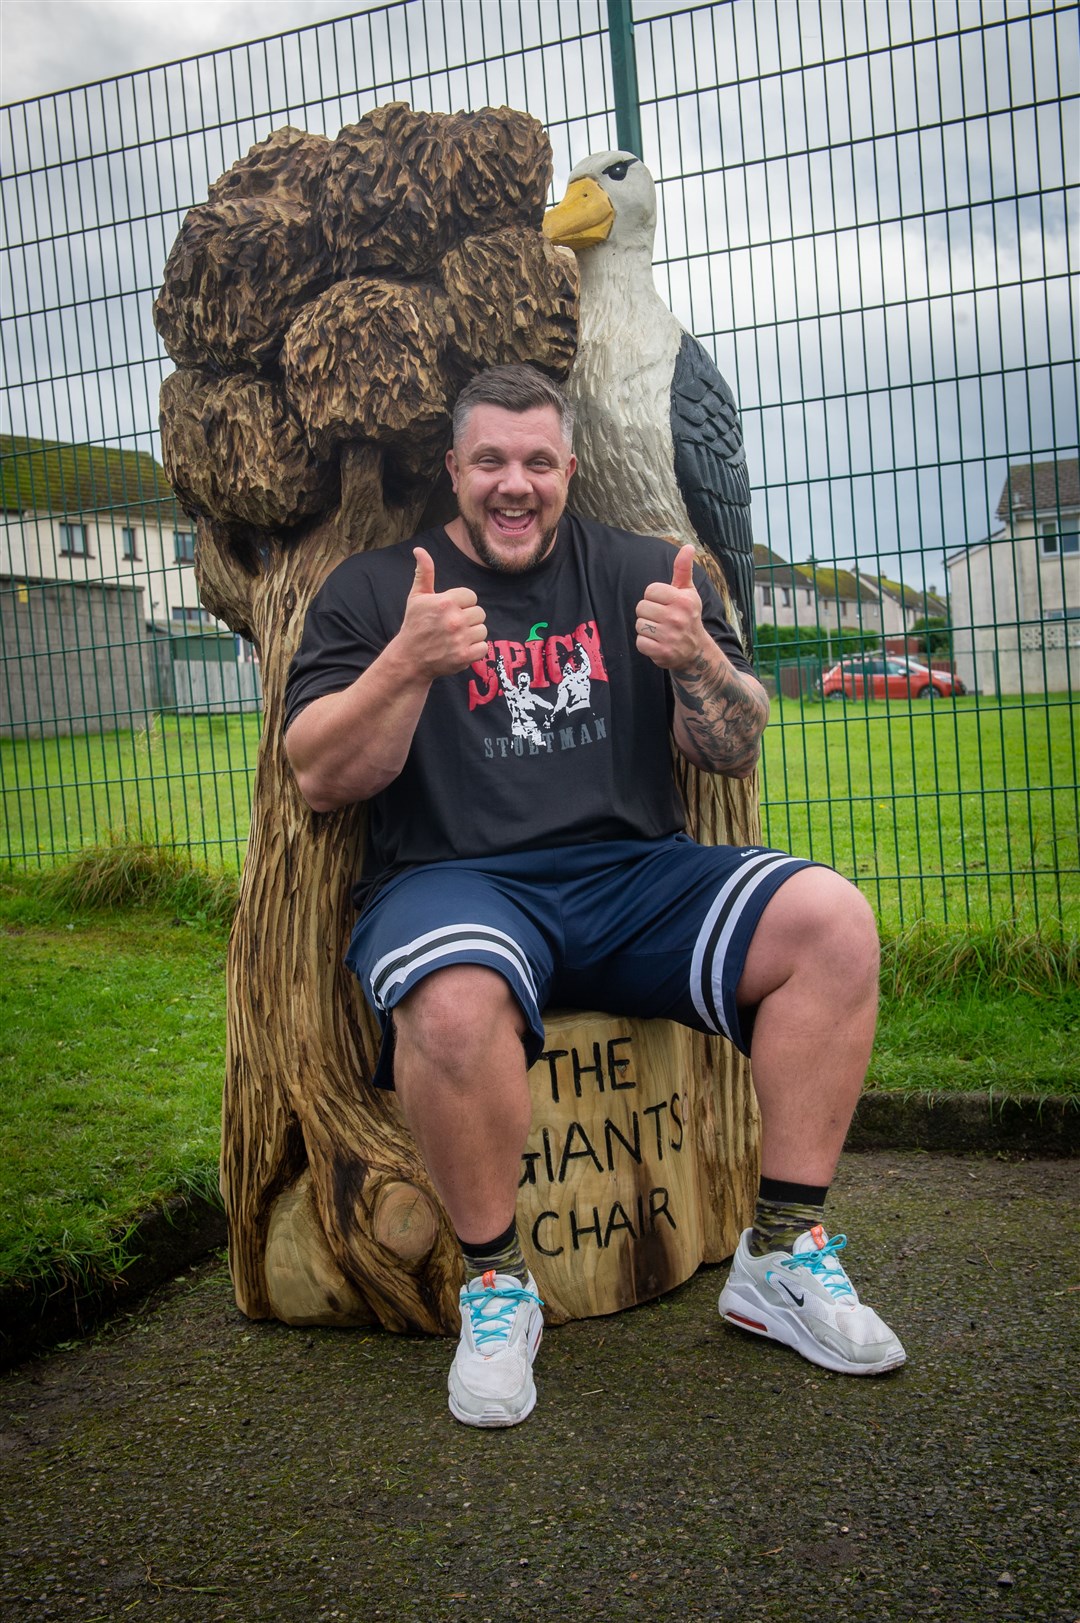 Luke Stoltman tries out the Giant's Chair he and brother Tom were surprised with at South Lodge Primary in Invergordon. Picture: Callum Mackay